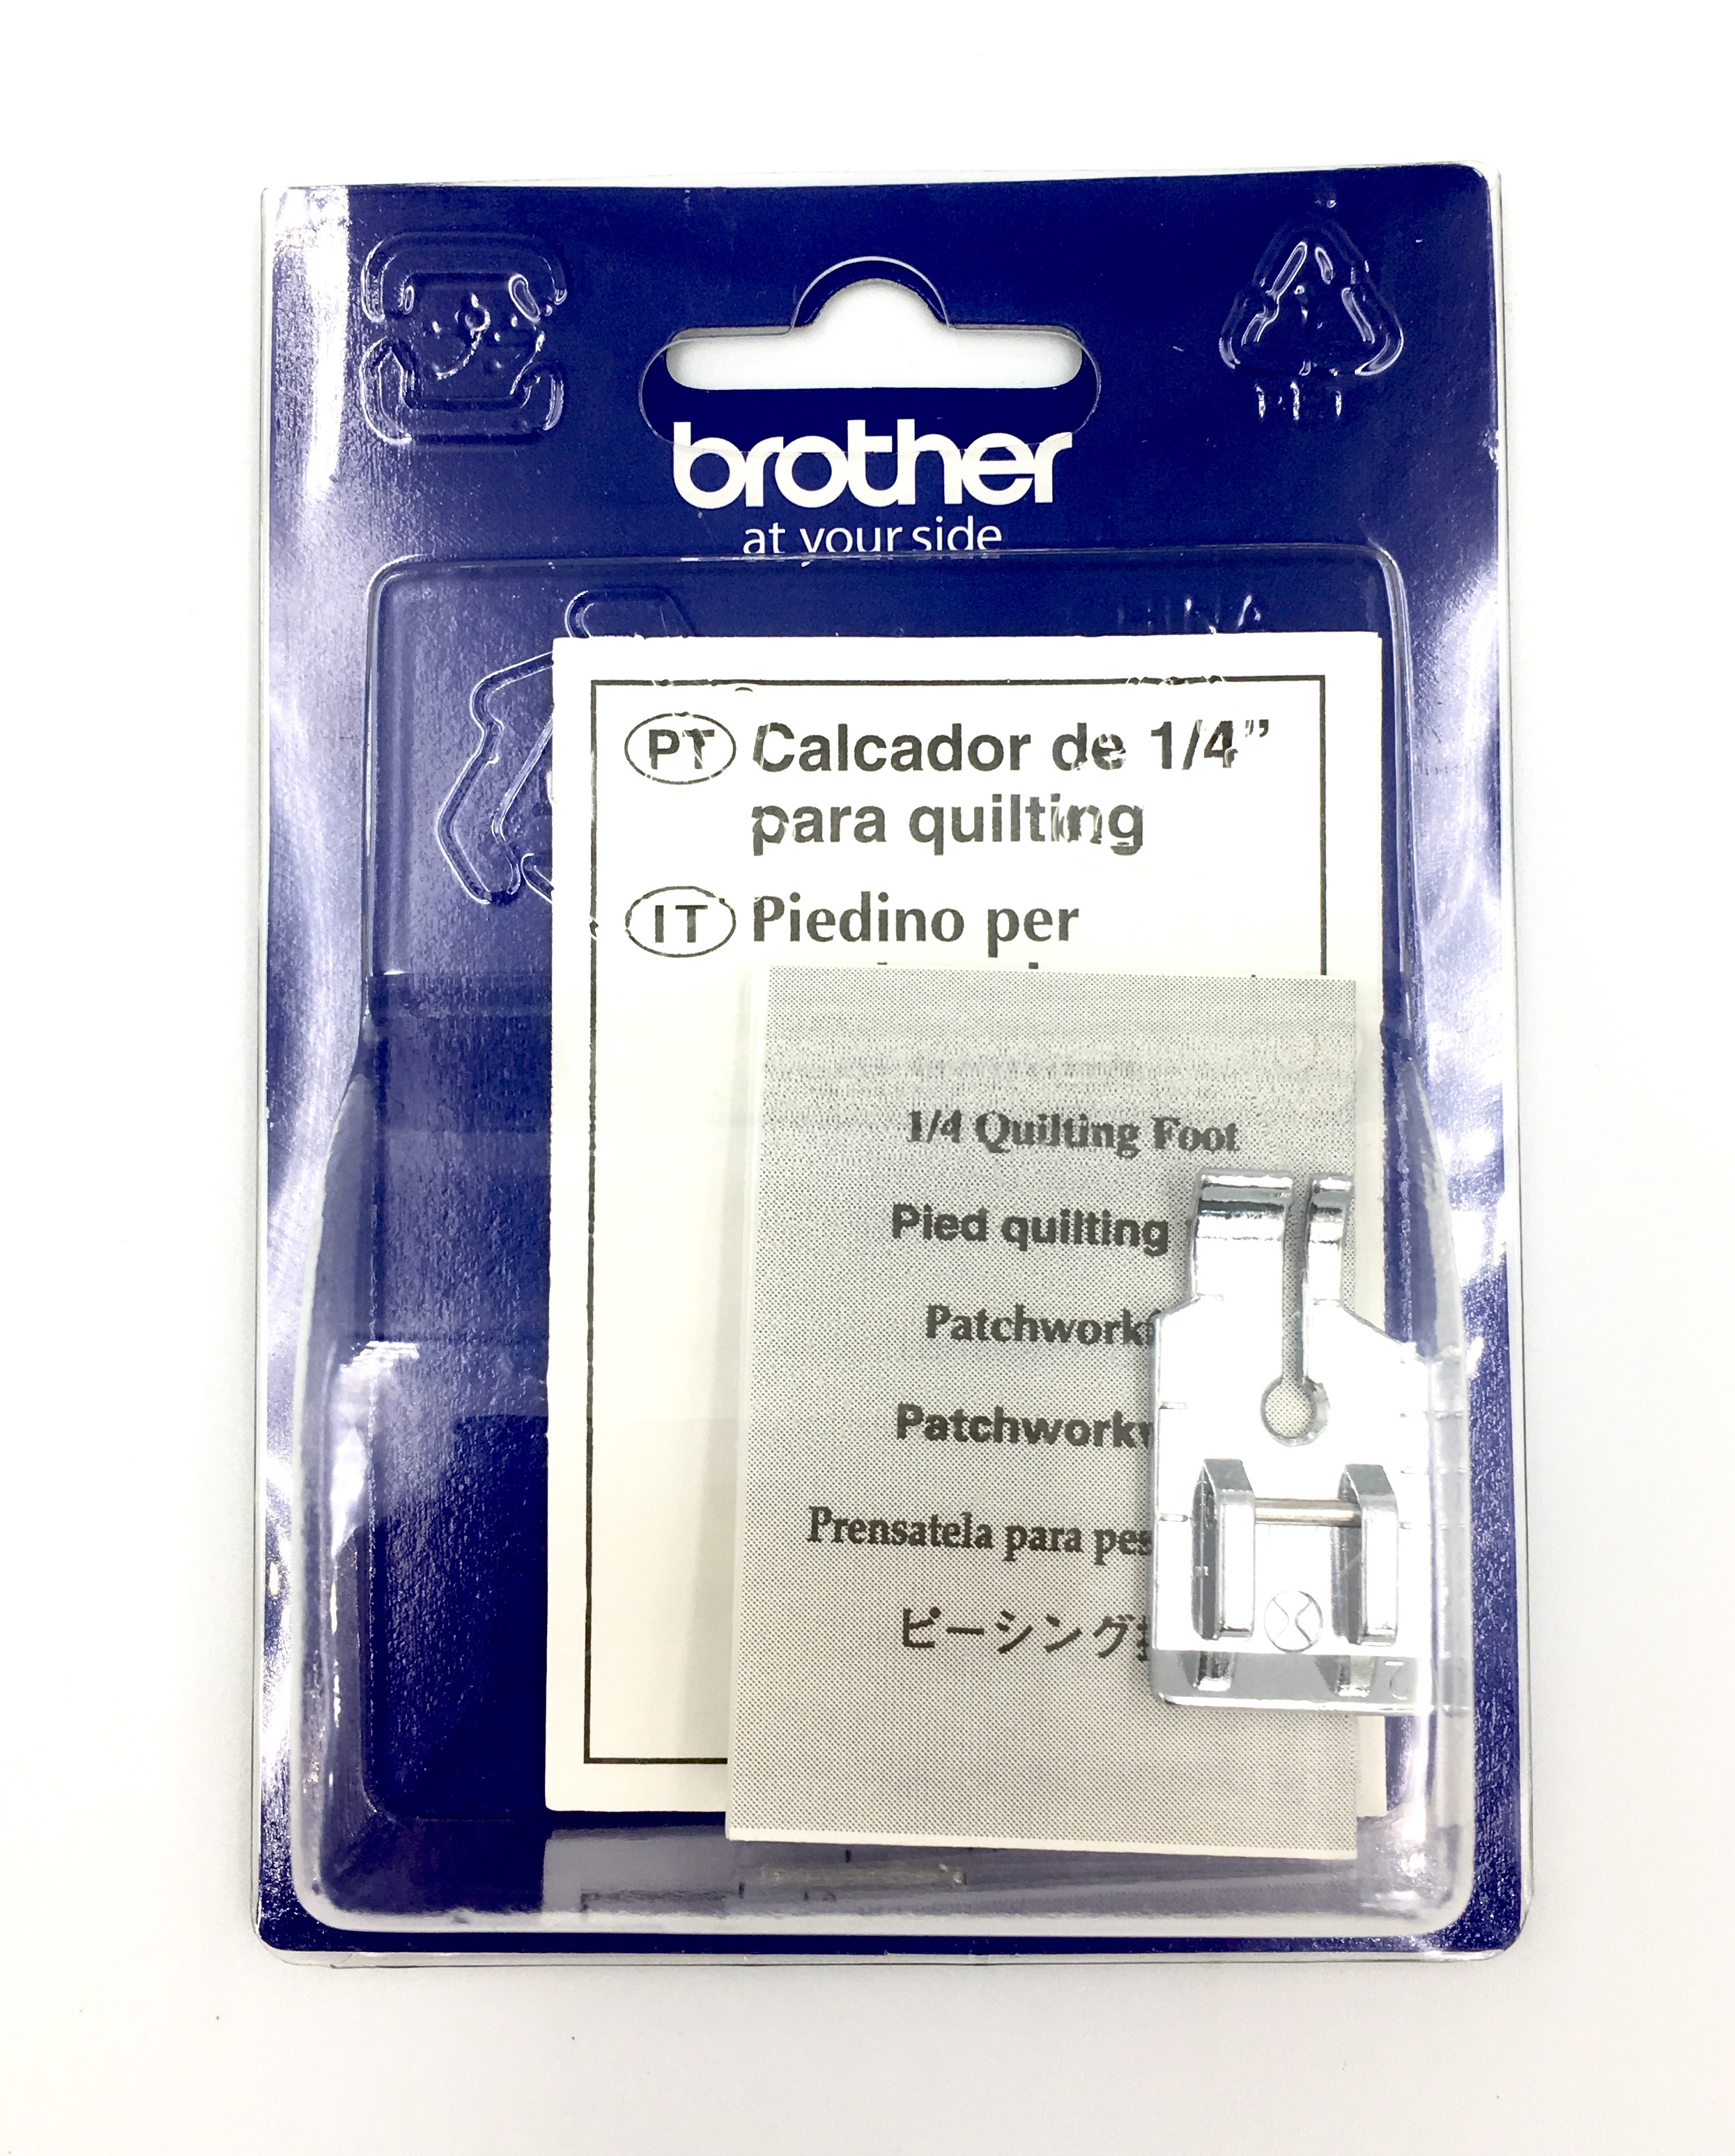 Brother 1/4 Quilting/Patchwork Foot - F001N